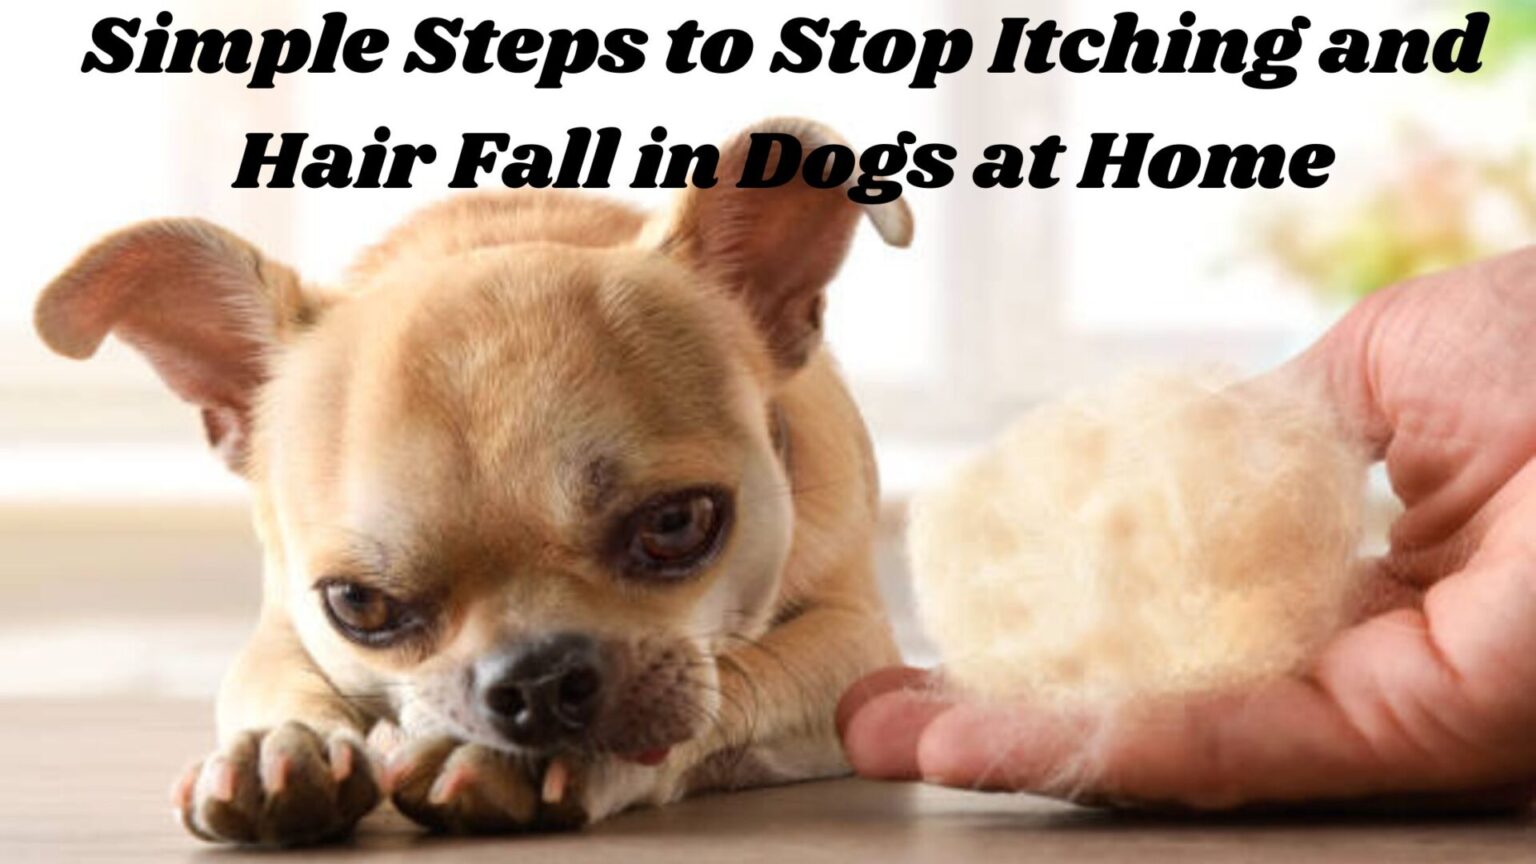 References American Kennel Club (AKC) - Dog Itching: Causes and Home Remedies ASPCA - Flea Control and Prevention PetMD - How to Treat Your Dog's Dry, Flaky Skin VCA Hospitals - Pruritus (Itching) in Dogs